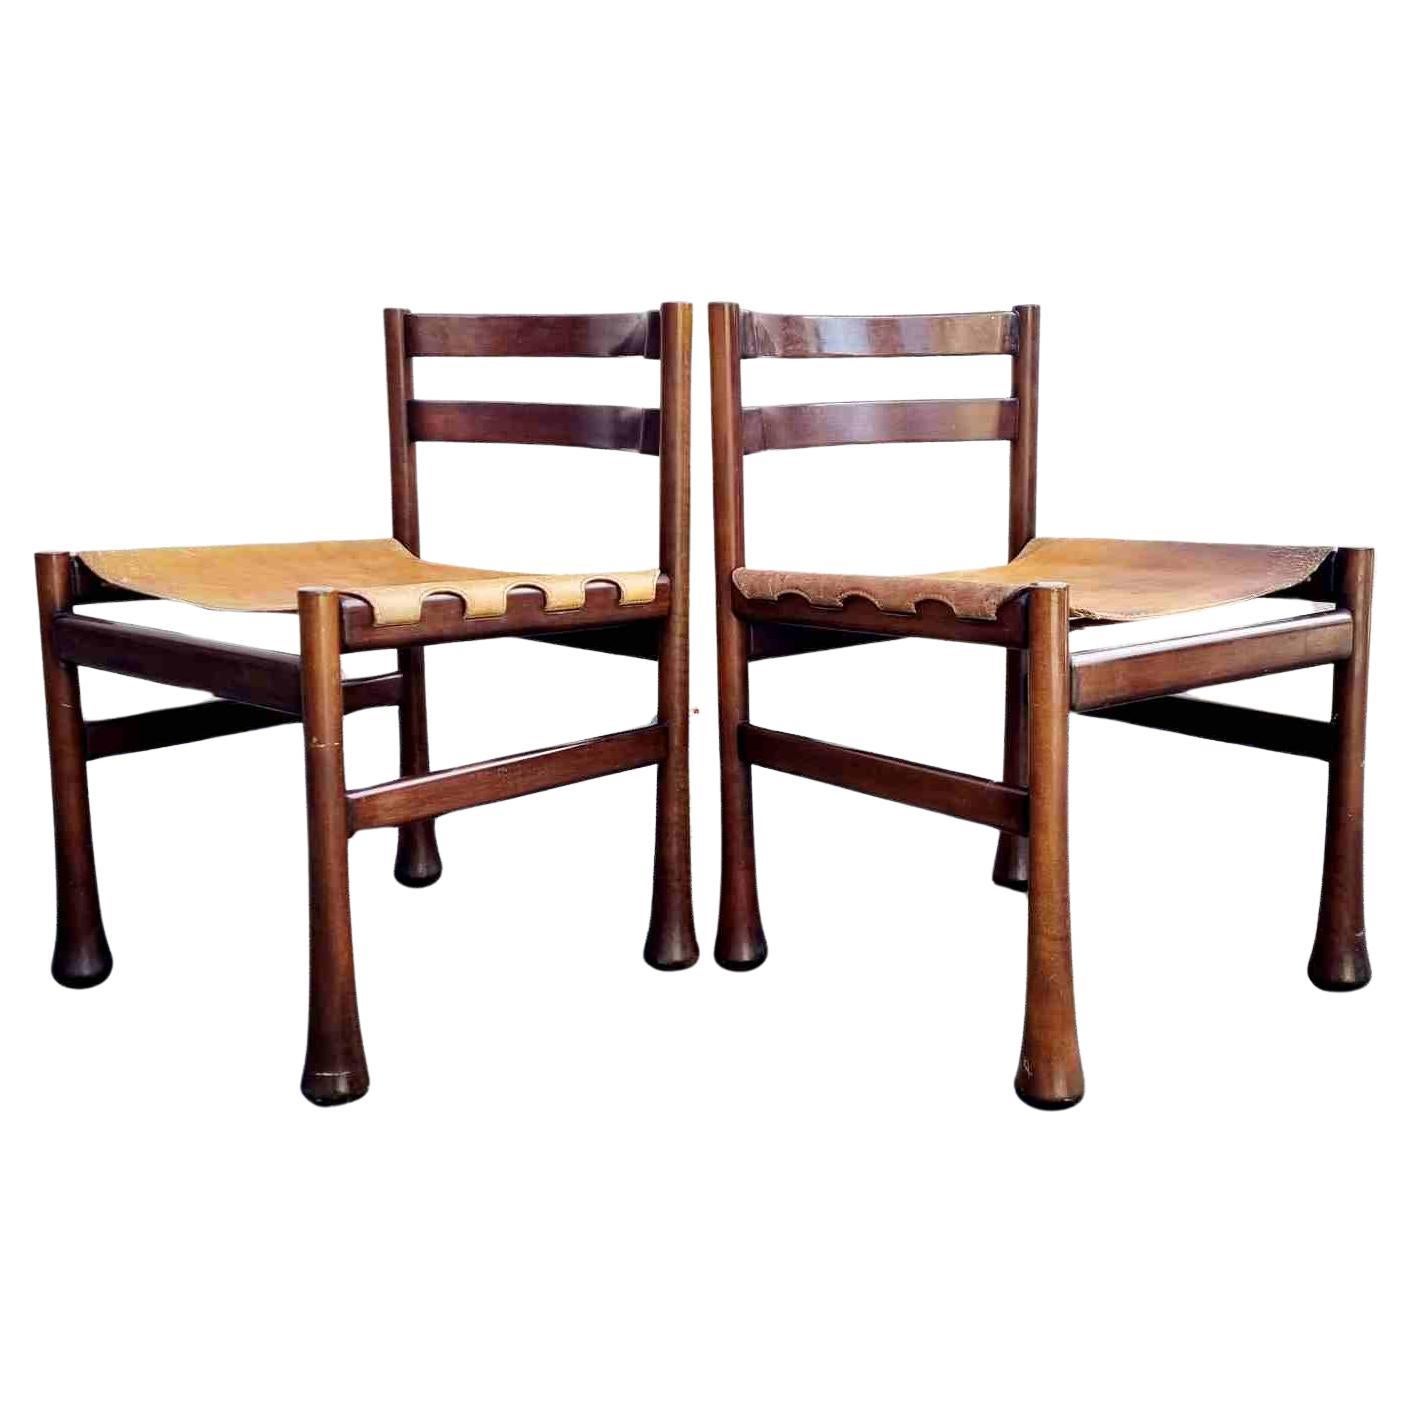 Italian Modern Rosewood and Leather Dining Chairs, Design Luciano Frigerio, 70s For Sale